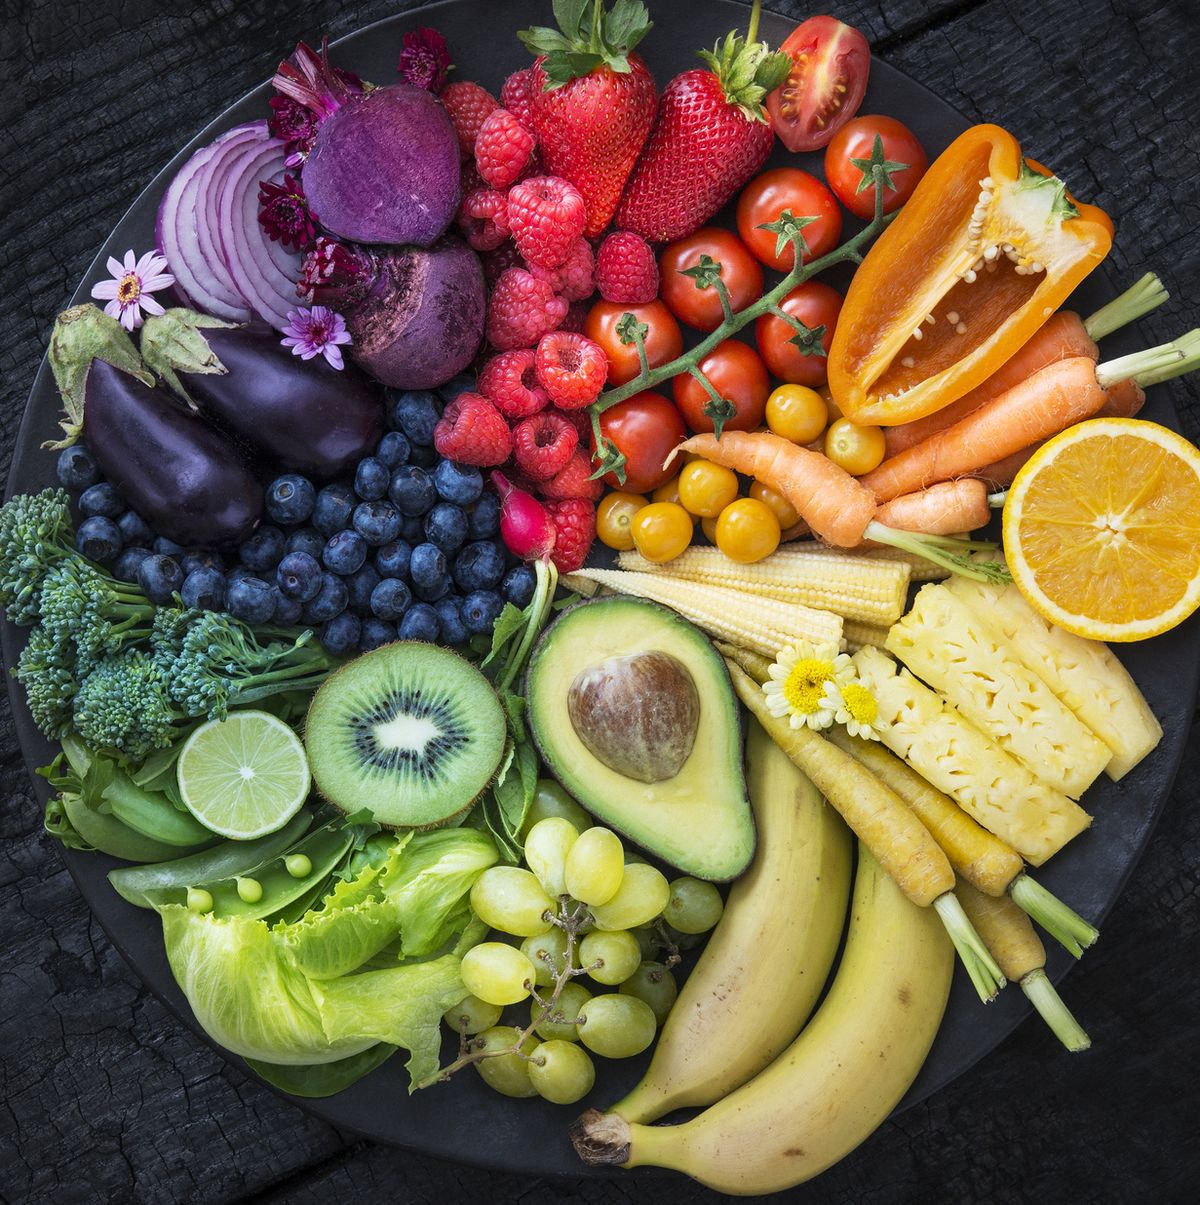 https://hips.hearstapps.com/hmg-prod/images/multicoloured-fruit-and-vegetables-in-a-black-bowl-royalty-free-image-1650038864.jpg?crop=0.636xw:0.798xh;0.184xw,0.118xh&resize=1200:*